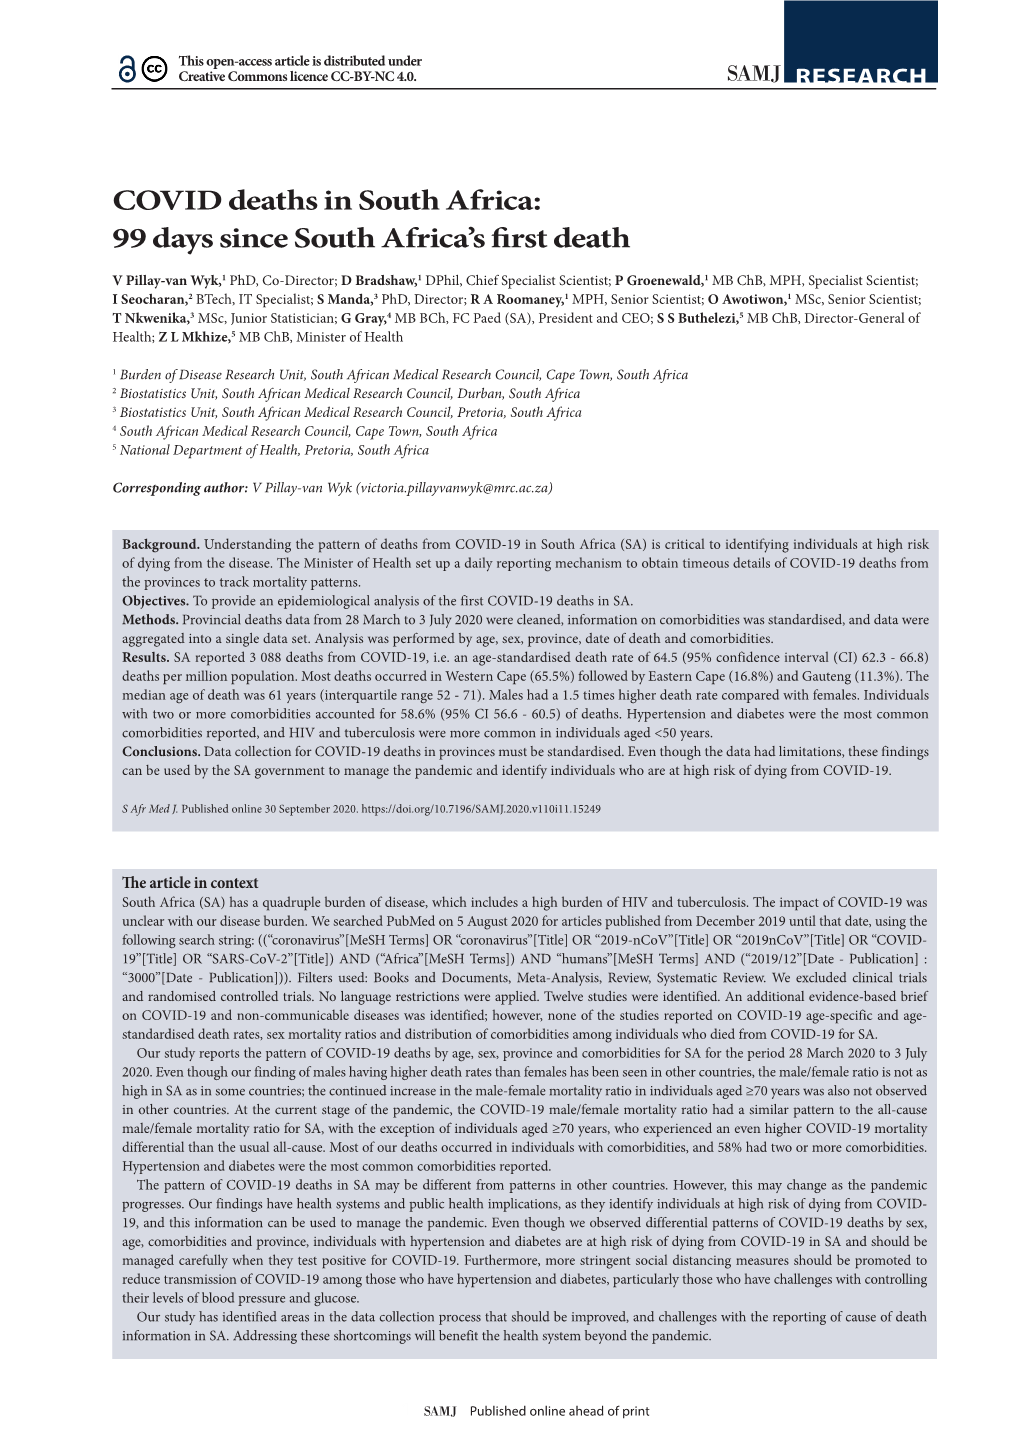 COVID Deaths in South Africa: 99 Days Since South Africa's First Death